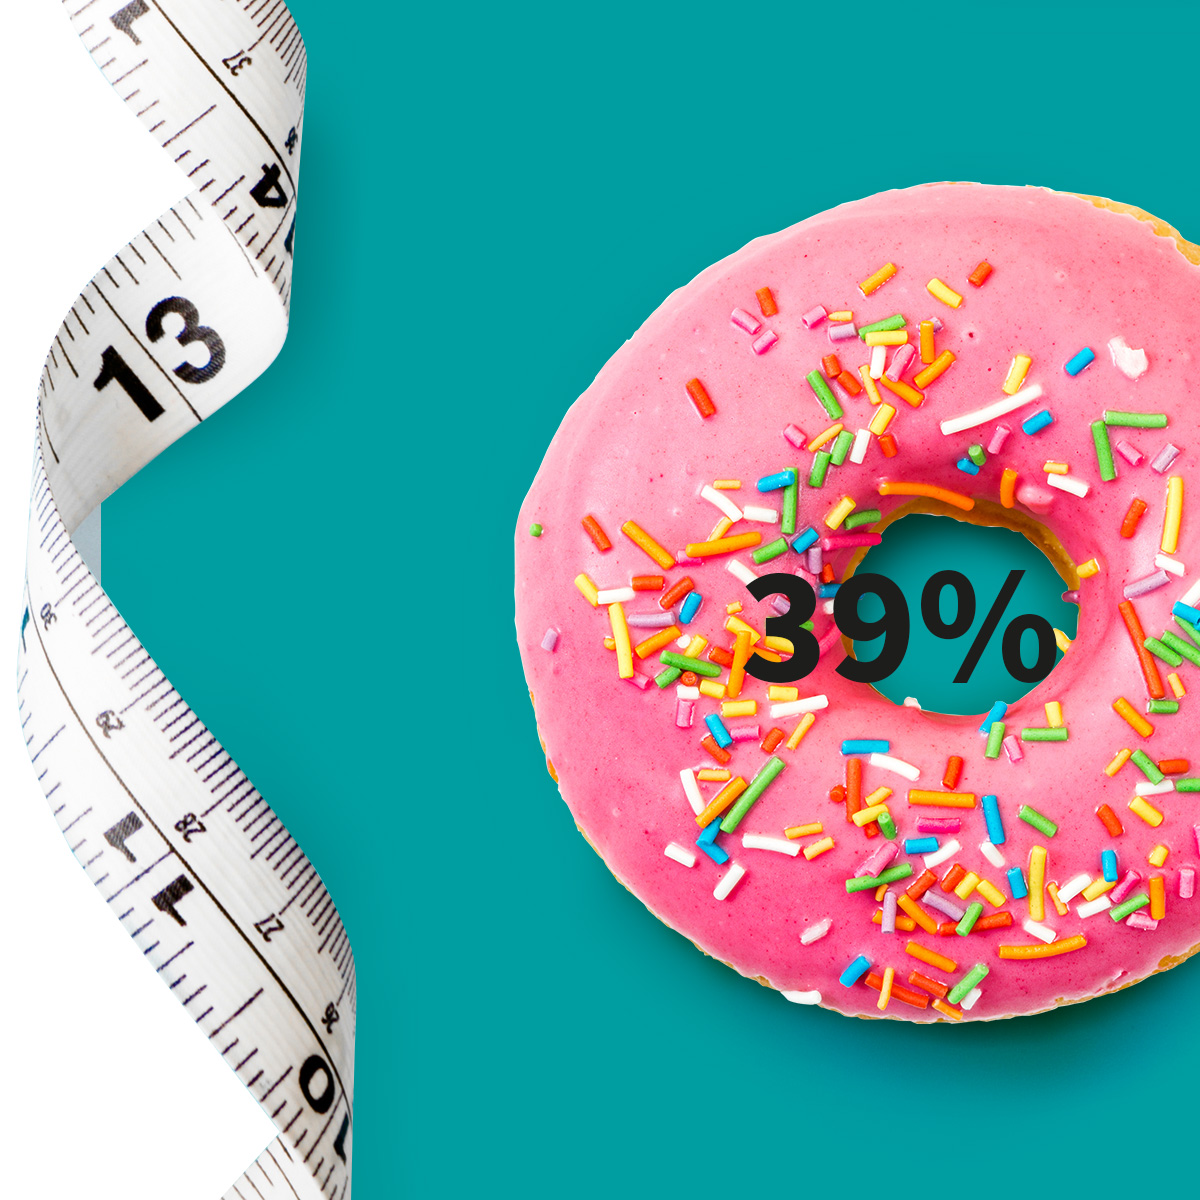 [.CZ-cz Czech Republik (czech)] •	A measuring tape and a doughnut with pink icing and colourful sugar sprinkle as a metaphor for obesity